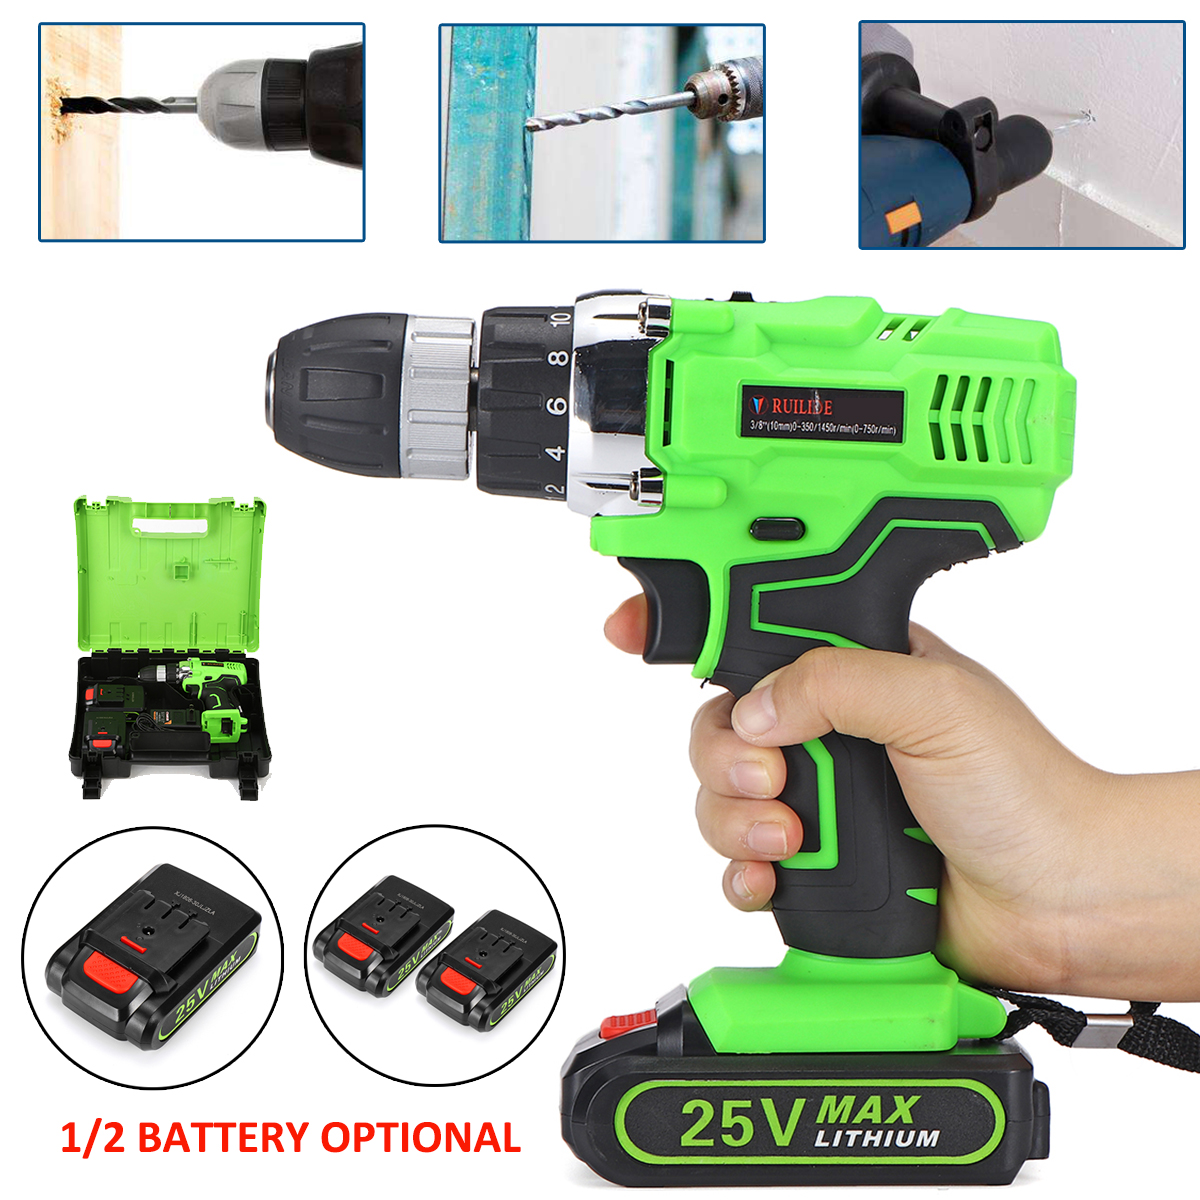 25V-Li-ion-Electric-Screwdriver-Dual-Speed-Power-Screw-Driver-Tool-For-DIY-Building-Engineering-1368106-3